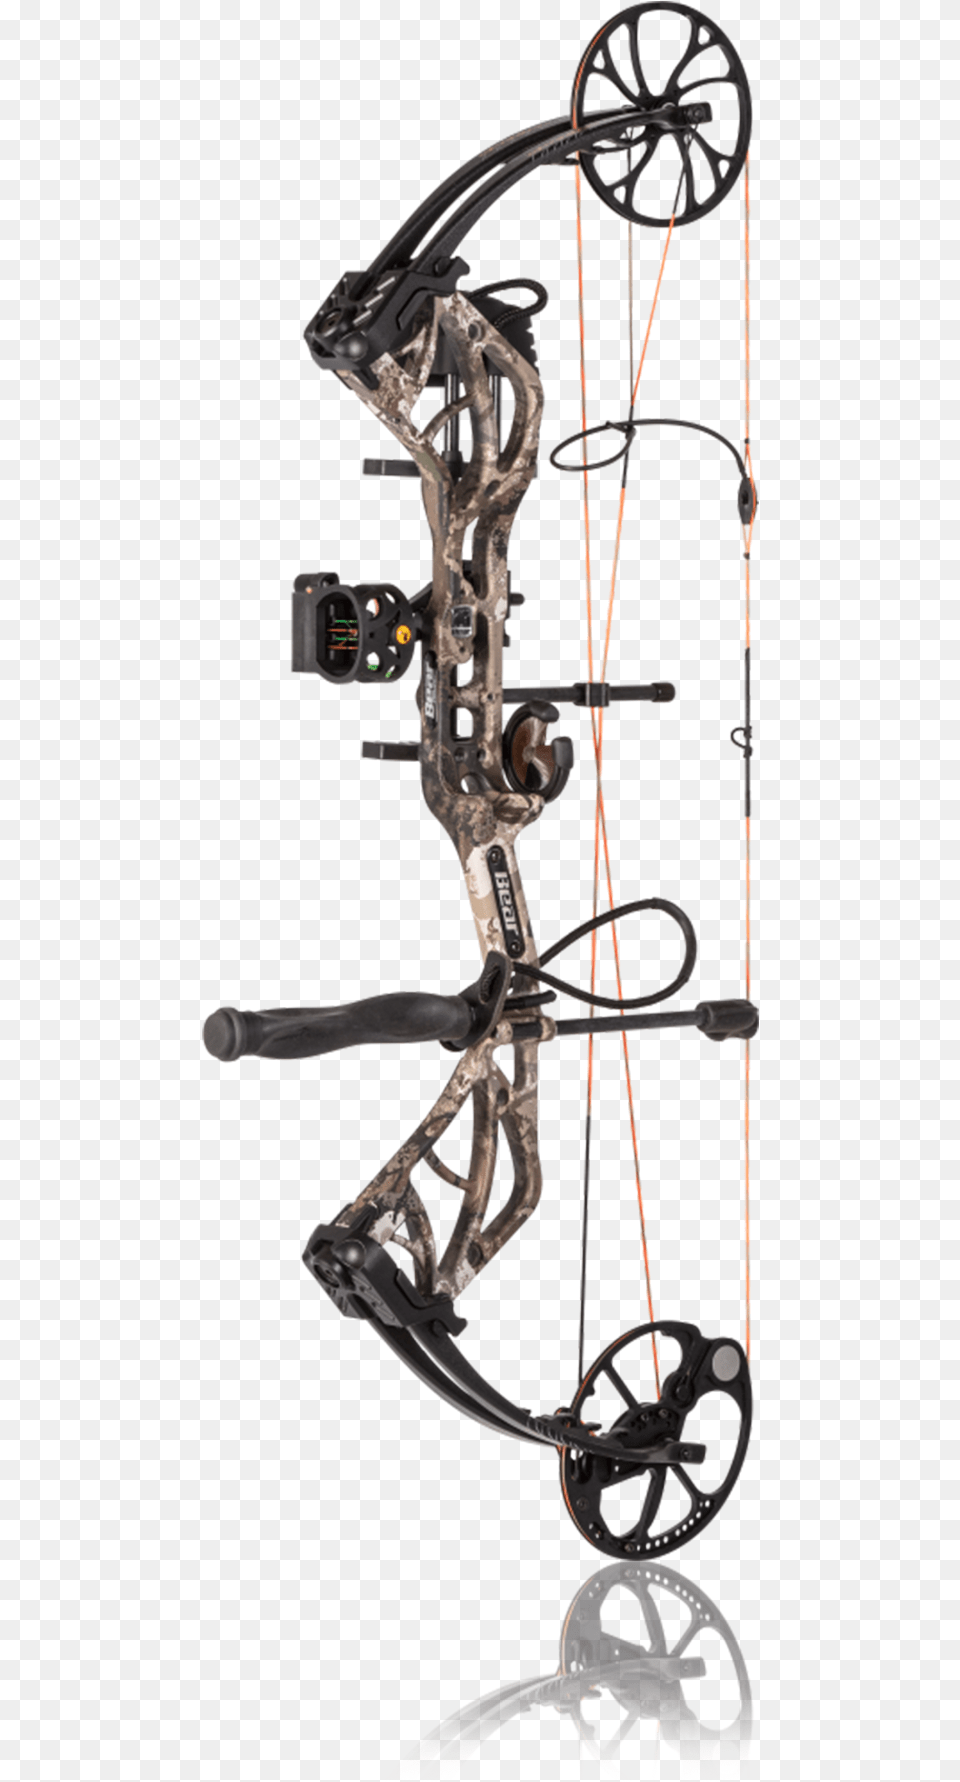 Glauberquots Sports Carrollton Ky Compound Bows Bear Archery 2019 Bows, Weapon, Bow, Machine, Wheel Free Png